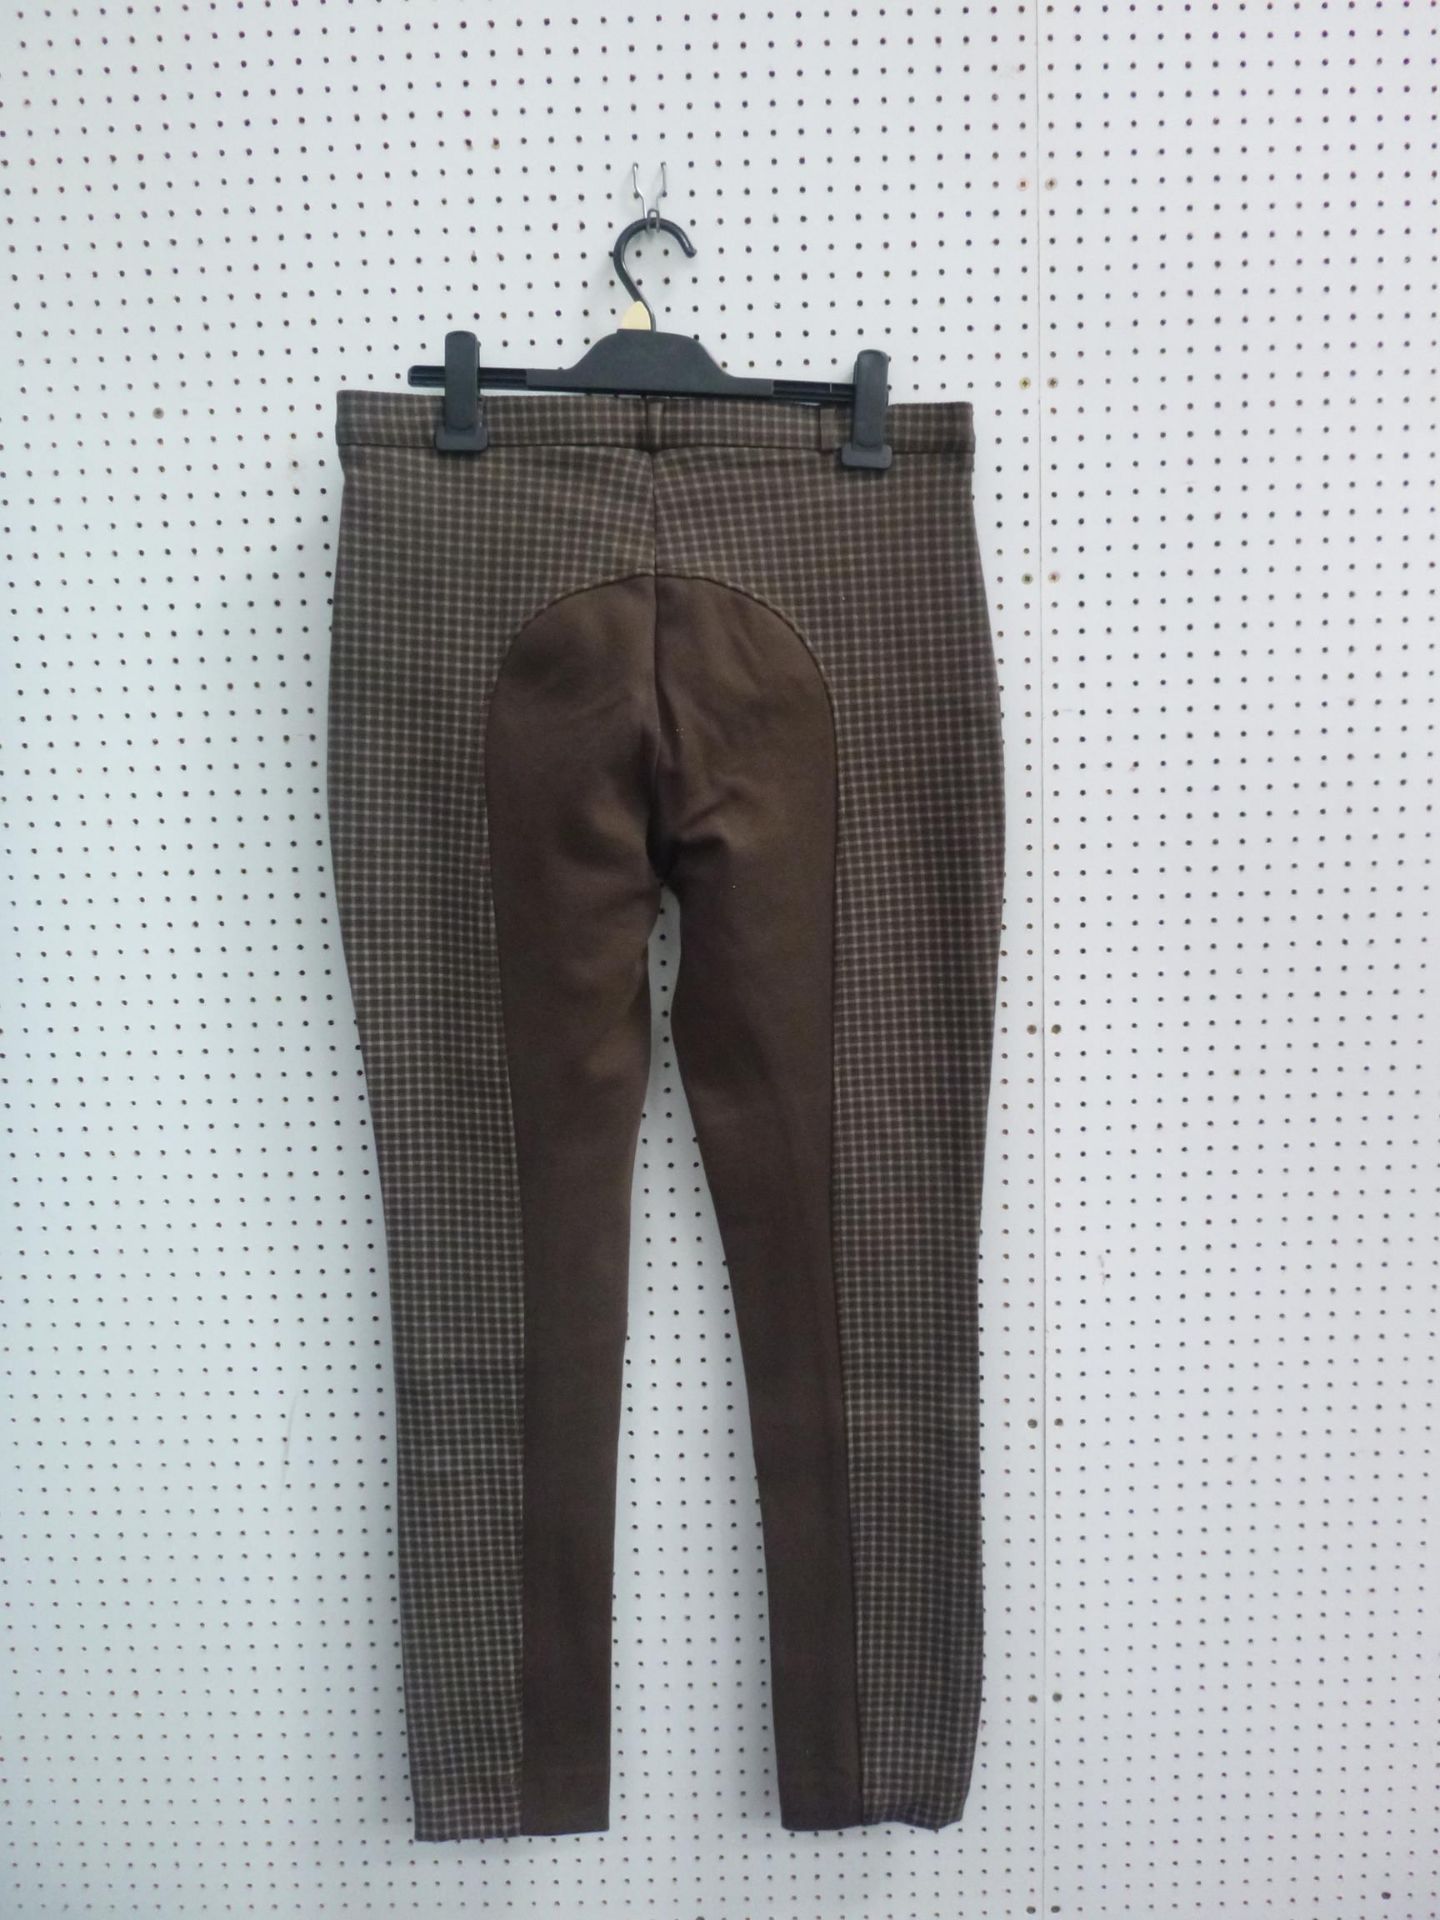 * Two pairs of New Bridleway Ladies Jodhpurs. A ladies Cotton Knitted Checks size 36 in Brown/ - Image 4 of 4